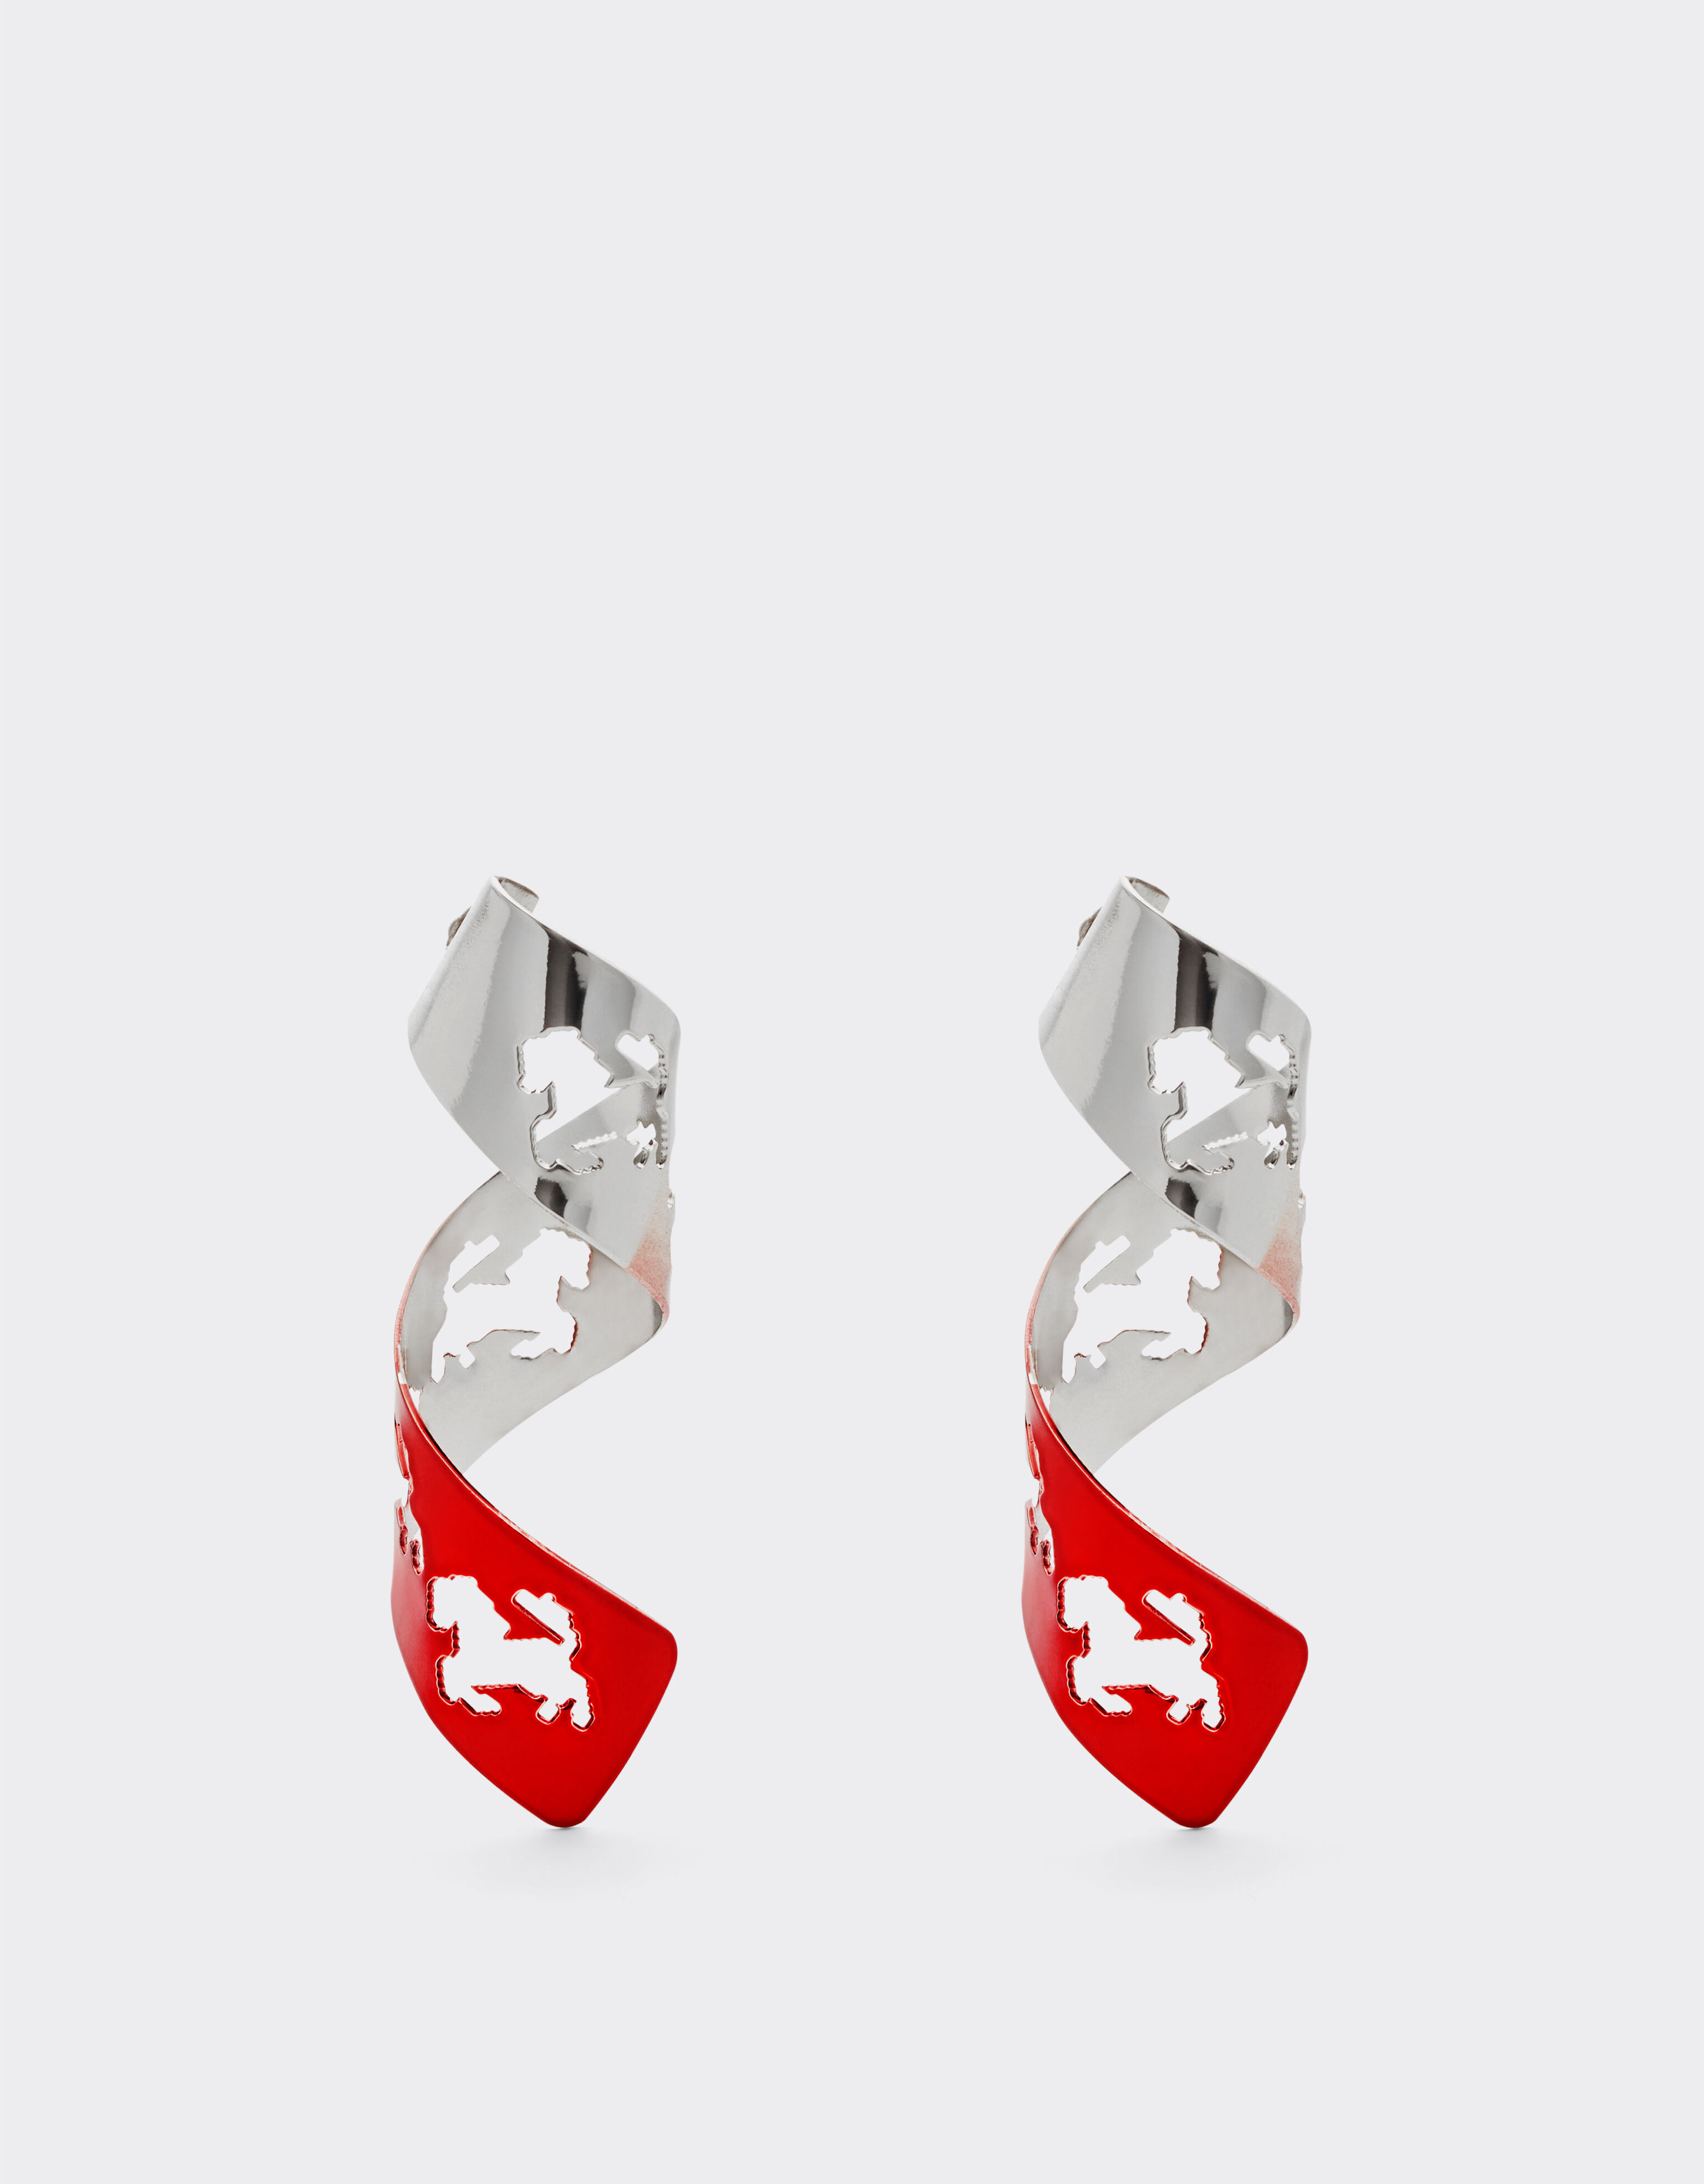 Ferrari Spiral earrings with Prancing Horse perforated pattern Charcoal 20014f